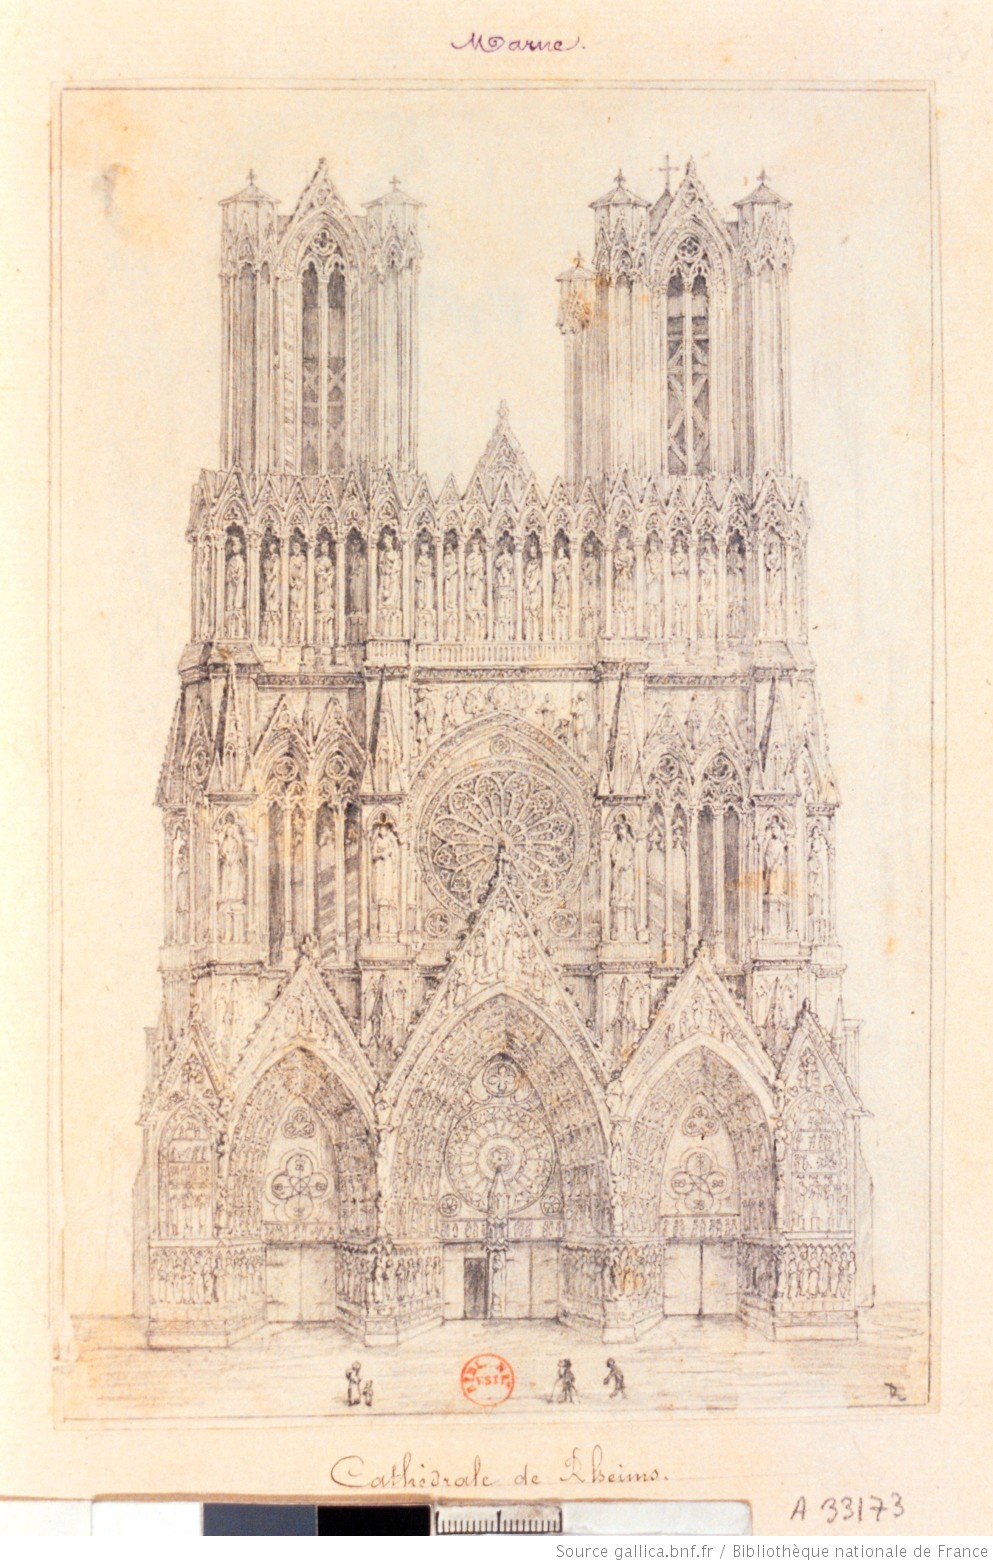 Sketch of the elaborate facade of the Cathedral of Reims, with two towers, huge rose windows, and gothic details.